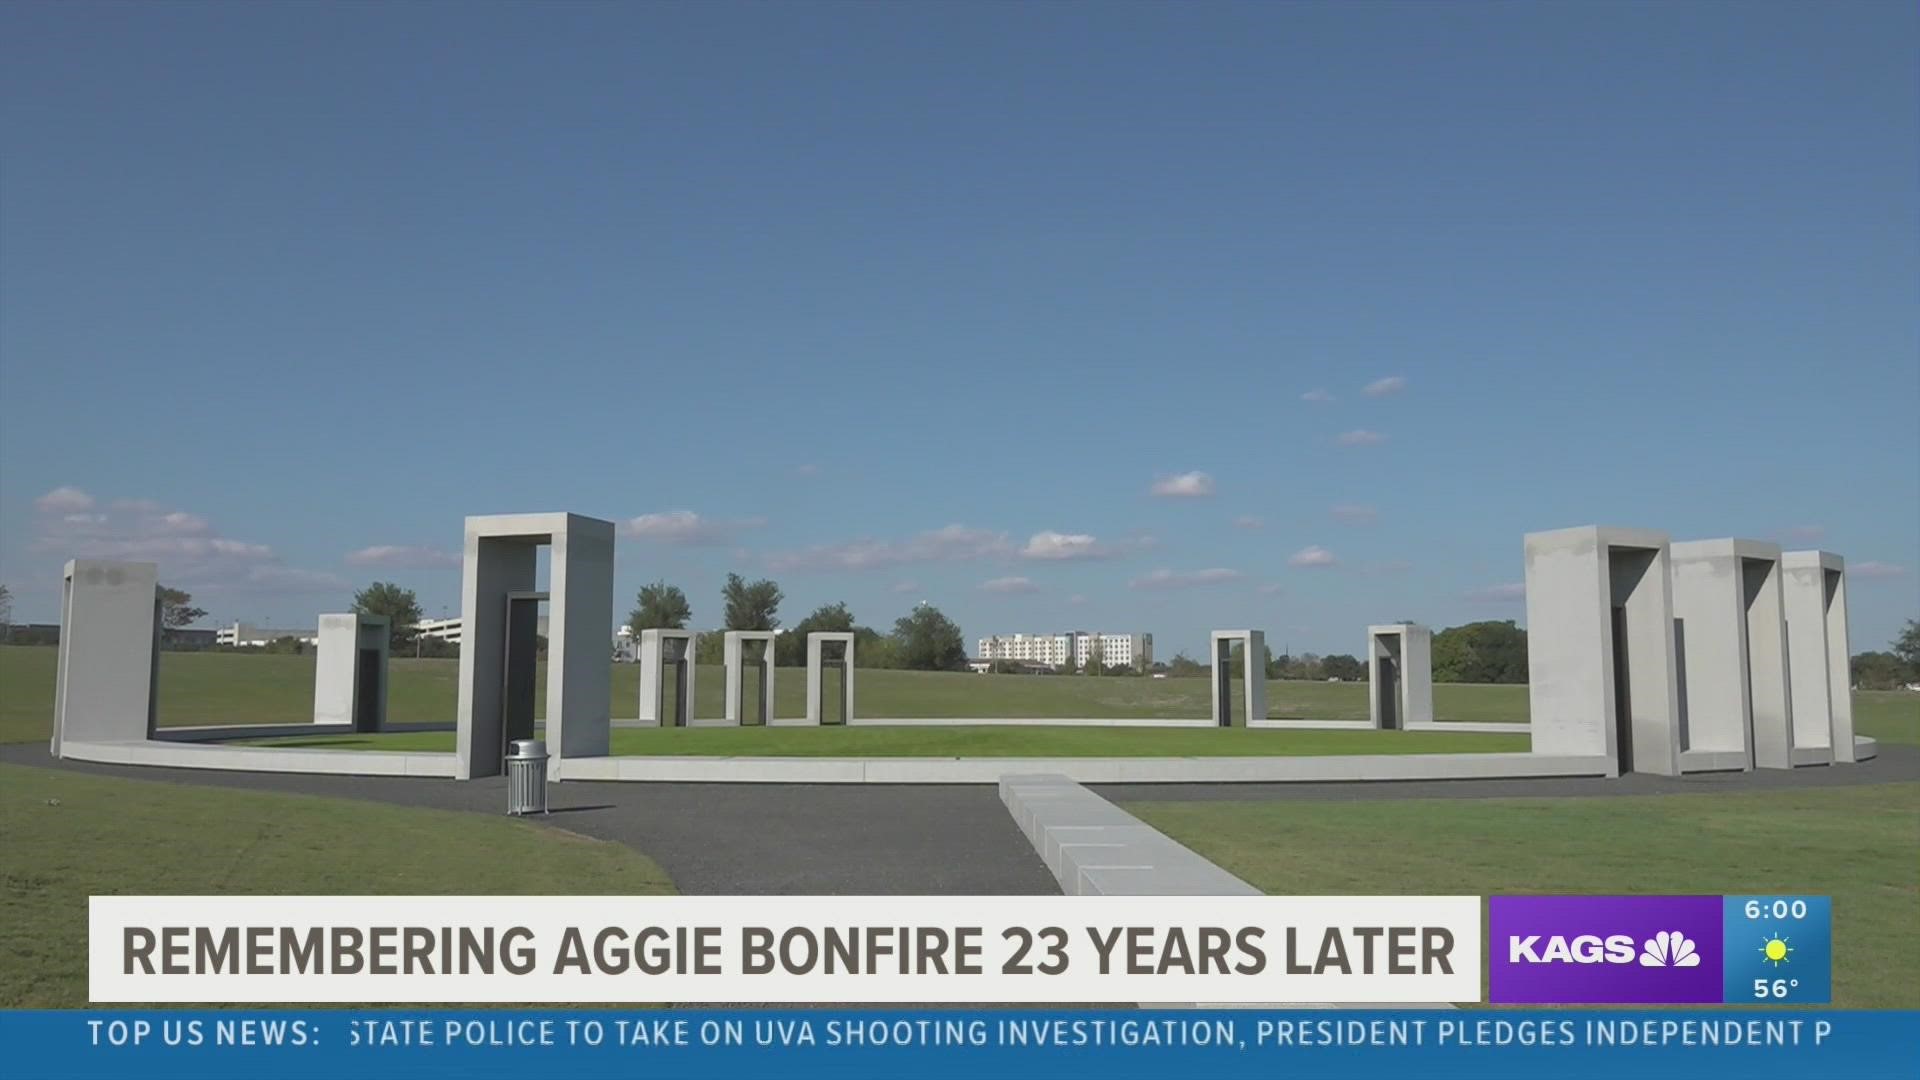 Texas A&M's Traditions Council will hold the 23rd Bonfire remembrance ceremony at 2:42 a.m. on Friday, Nov. 18.